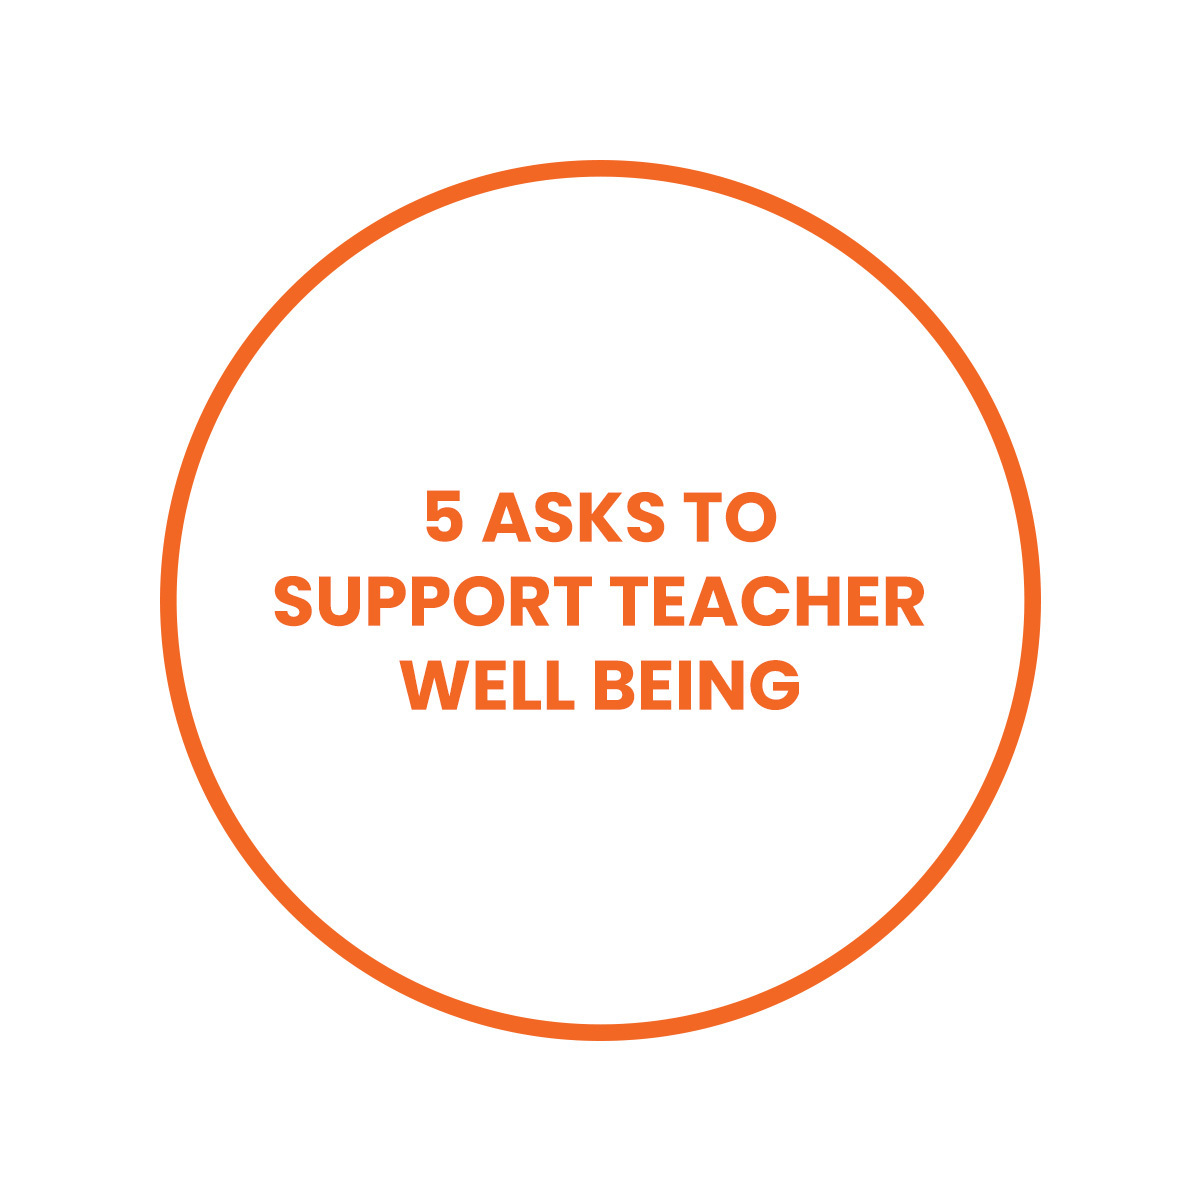 5 asks to support teacher well being